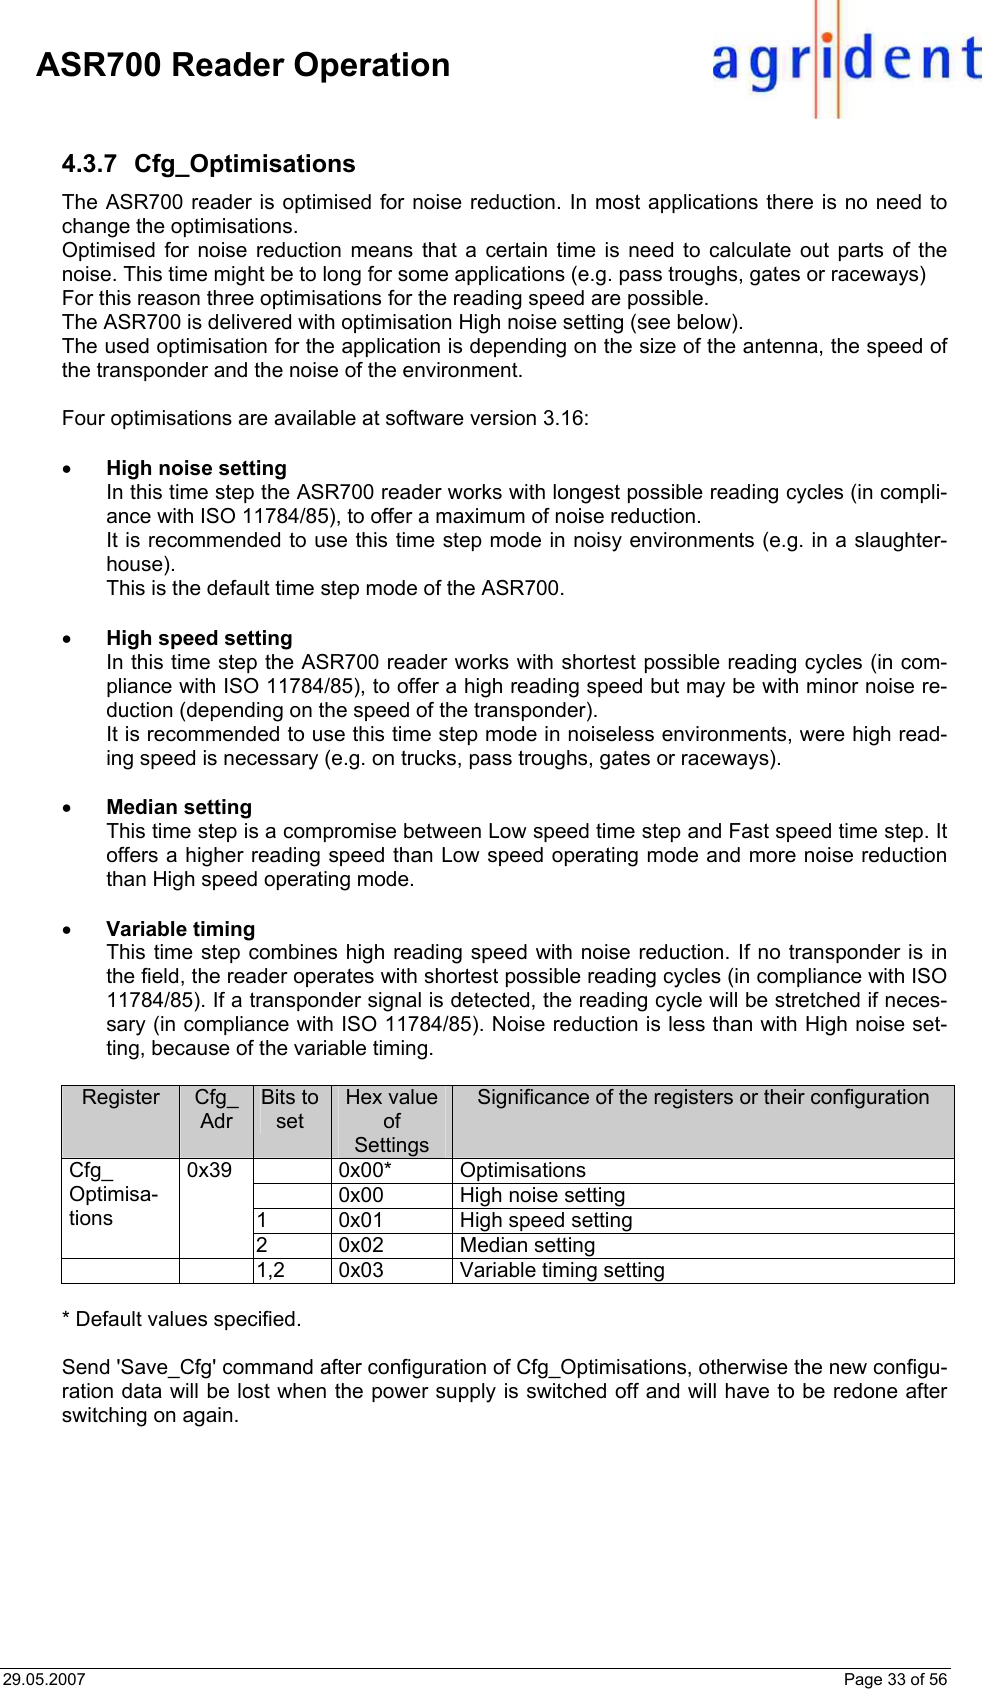 29.05.2007    Page 33 of 56     ASR700 Reader Operation  4.3.7 Cfg_Optimisations The ASR700 reader is optimised for noise reduction. In most applications there is no need to change the optimisations. Optimised for noise reduction means that a certain time is need to calculate out parts of the noise. This time might be to long for some applications (e.g. pass troughs, gates or raceways) For this reason three optimisations for the reading speed are possible.  The ASR700 is delivered with optimisation High noise setting (see below). The used optimisation for the application is depending on the size of the antenna, the speed of the transponder and the noise of the environment.    Four optimisations are available at software version 3.16:  • High noise setting In this time step the ASR700 reader works with longest possible reading cycles (in compli-ance with ISO 11784/85), to offer a maximum of noise reduction. It is recommended to use this time step mode in noisy environments (e.g. in a slaughter-house). This is the default time step mode of the ASR700.  • High speed setting In this time step the ASR700 reader works with shortest possible reading cycles (in com-pliance with ISO 11784/85), to offer a high reading speed but may be with minor noise re-duction (depending on the speed of the transponder). It is recommended to use this time step mode in noiseless environments, were high read-ing speed is necessary (e.g. on trucks, pass troughs, gates or raceways).  • Median setting This time step is a compromise between Low speed time step and Fast speed time step. It offers a higher reading speed than Low speed operating mode and more noise reduction than High speed operating mode.    • Variable timing This time step combines high reading speed with noise reduction. If no transponder is in the field, the reader operates with shortest possible reading cycles (in compliance with ISO 11784/85). If a transponder signal is detected, the reading cycle will be stretched if neces-sary (in compliance with ISO 11784/85). Noise reduction is less than with High noise set-ting, because of the variable timing.   Register  Cfg_ Adr Bits to set Hex value of Settings Significance of the registers or their configuration  0x00* Optimisations   0x00  High noise setting 1  0x01  High speed setting Cfg_ Optimisa-tions 0x39 2  0x02  Median setting      1,2  0x03  Variable timing setting  * Default values specified.  Send &apos;Save_Cfg&apos; command after configuration of Cfg_Optimisations, otherwise the new configu-ration data will be lost when the power supply is switched off and will have to be redone after switching on again. 